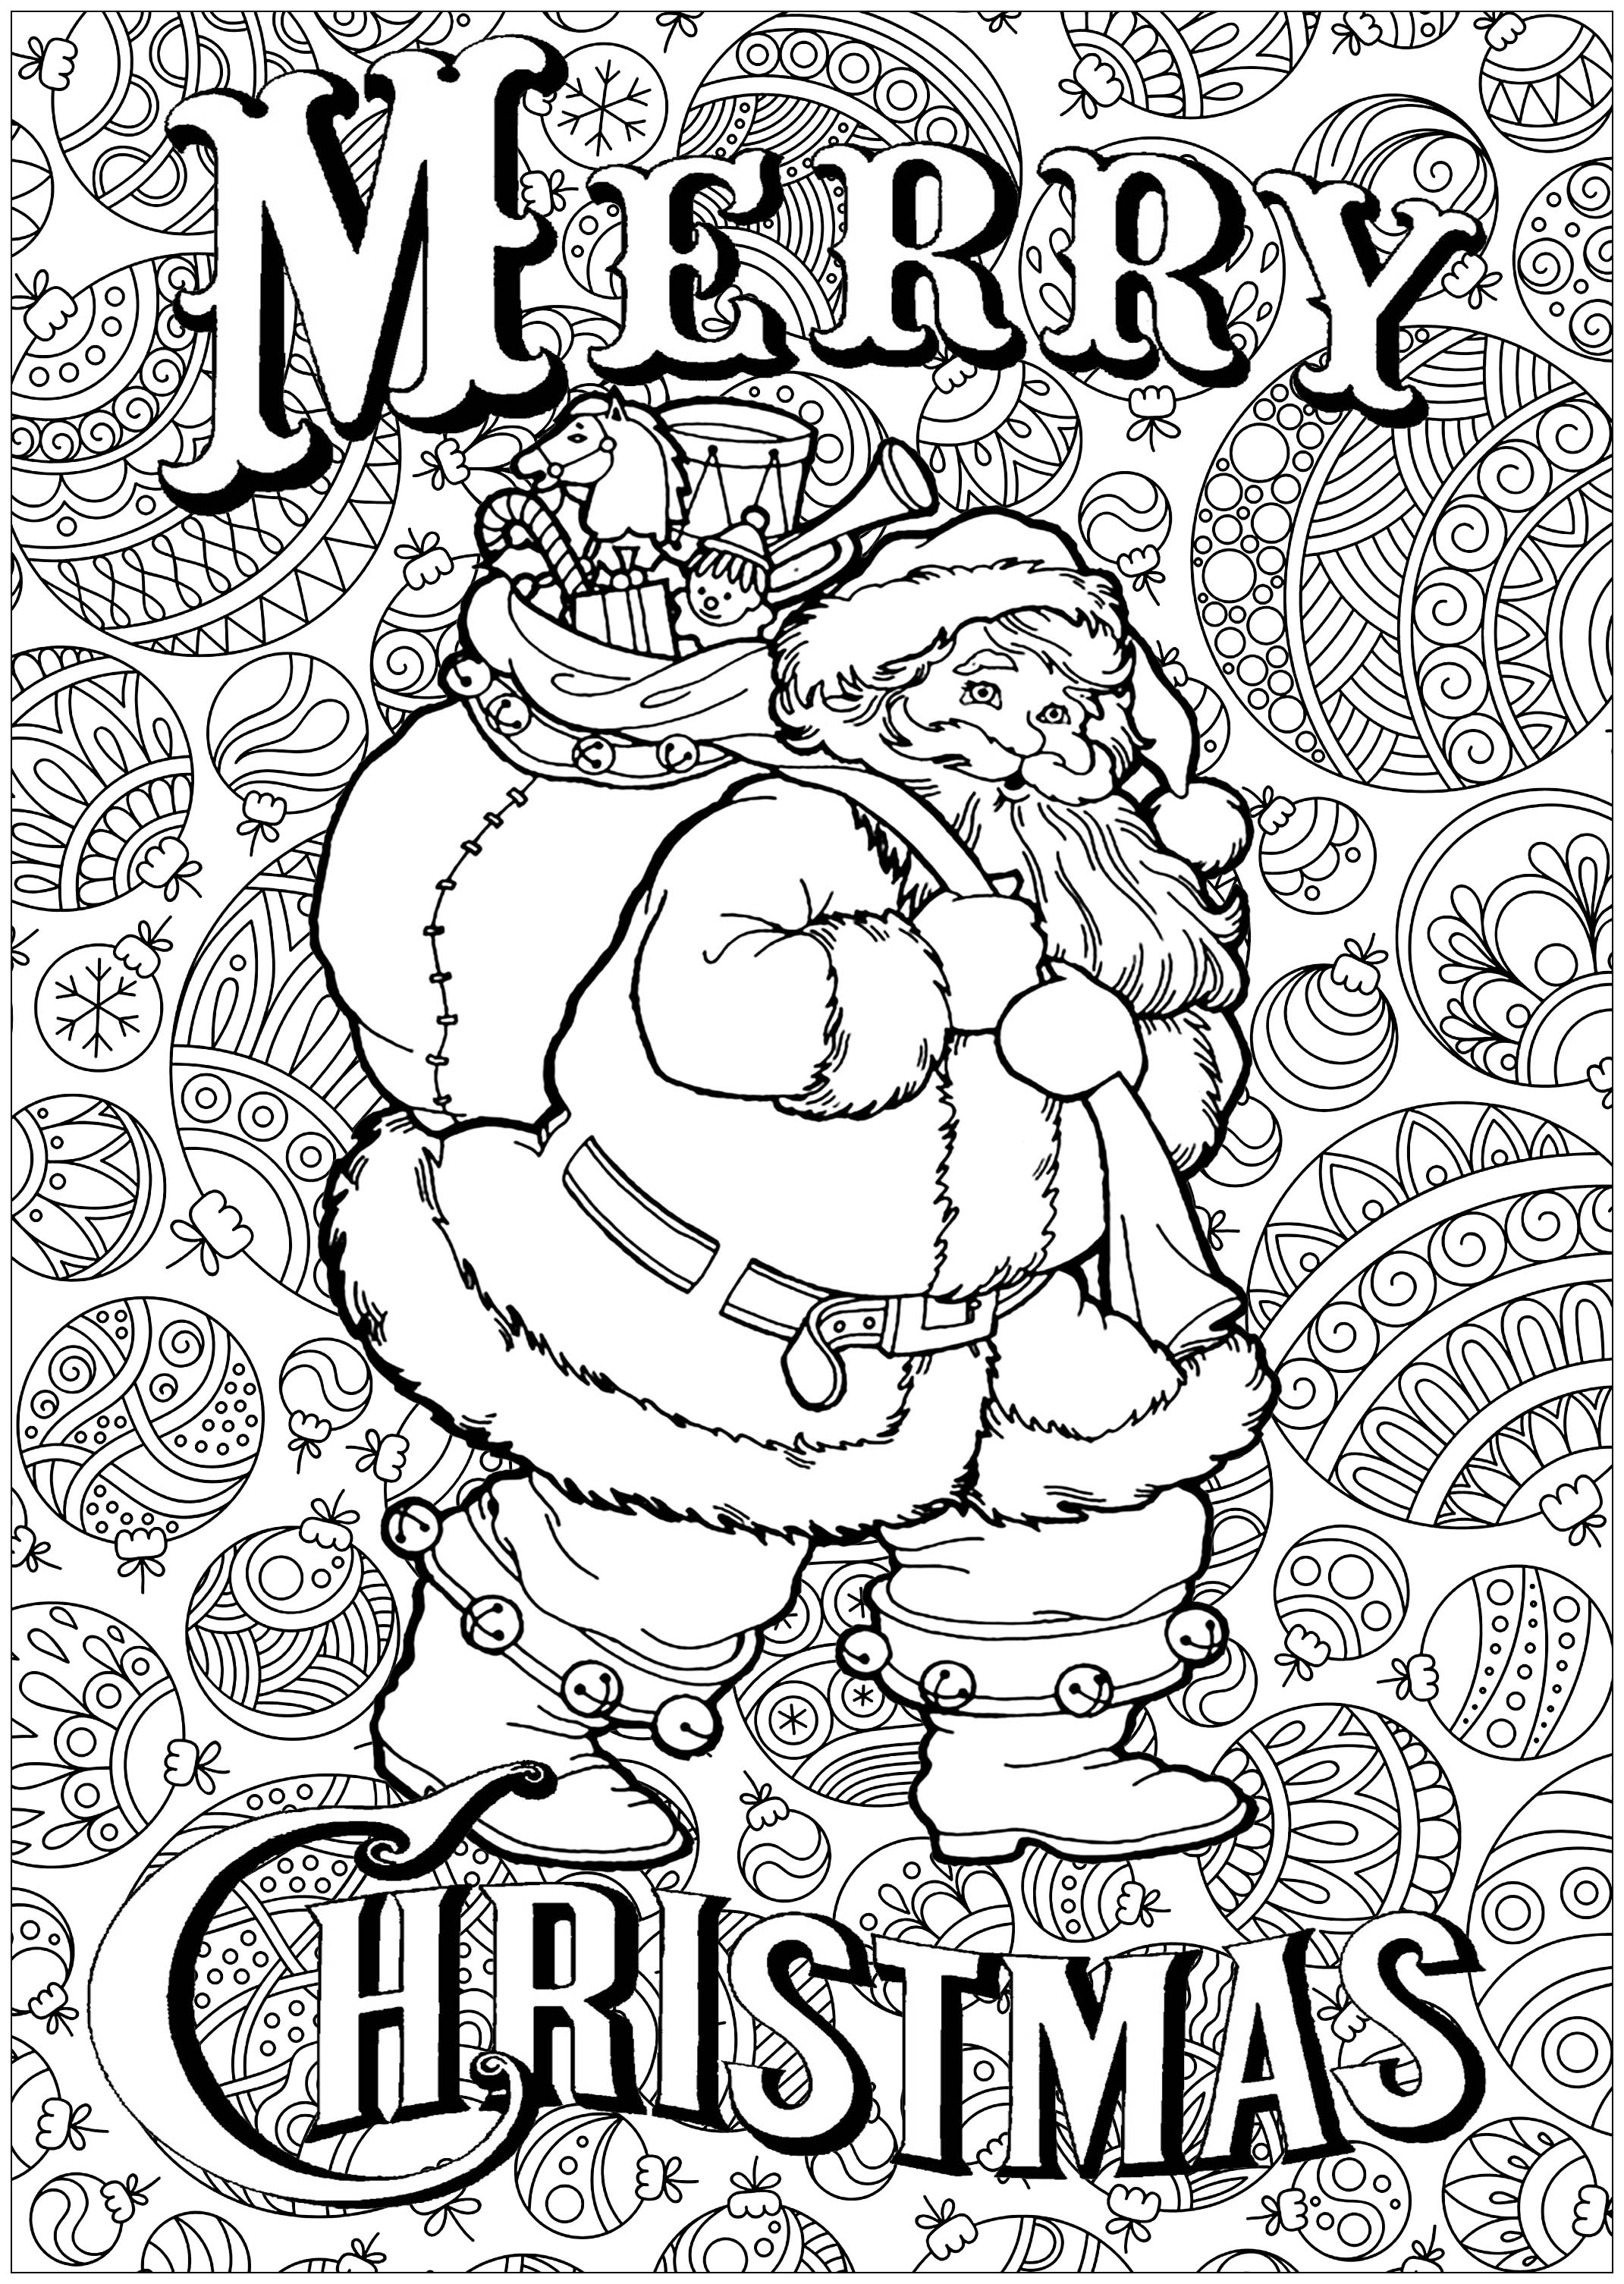 Download Christmas Coloring Pages - Best Coloring Pages For Kids